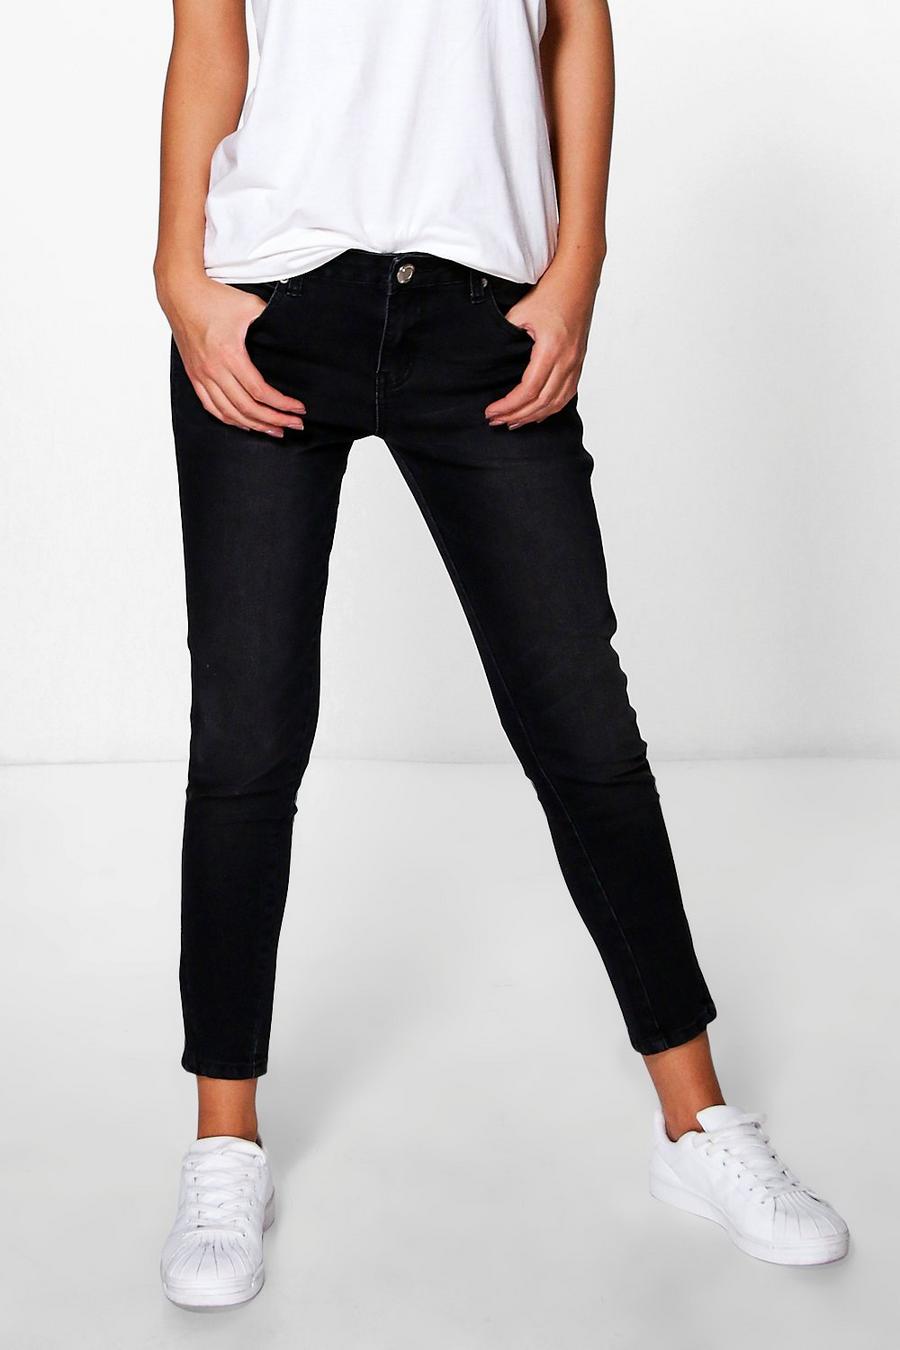 Charcoal grey Abby High Rise Side Stripe Skinny Jeans image number 1